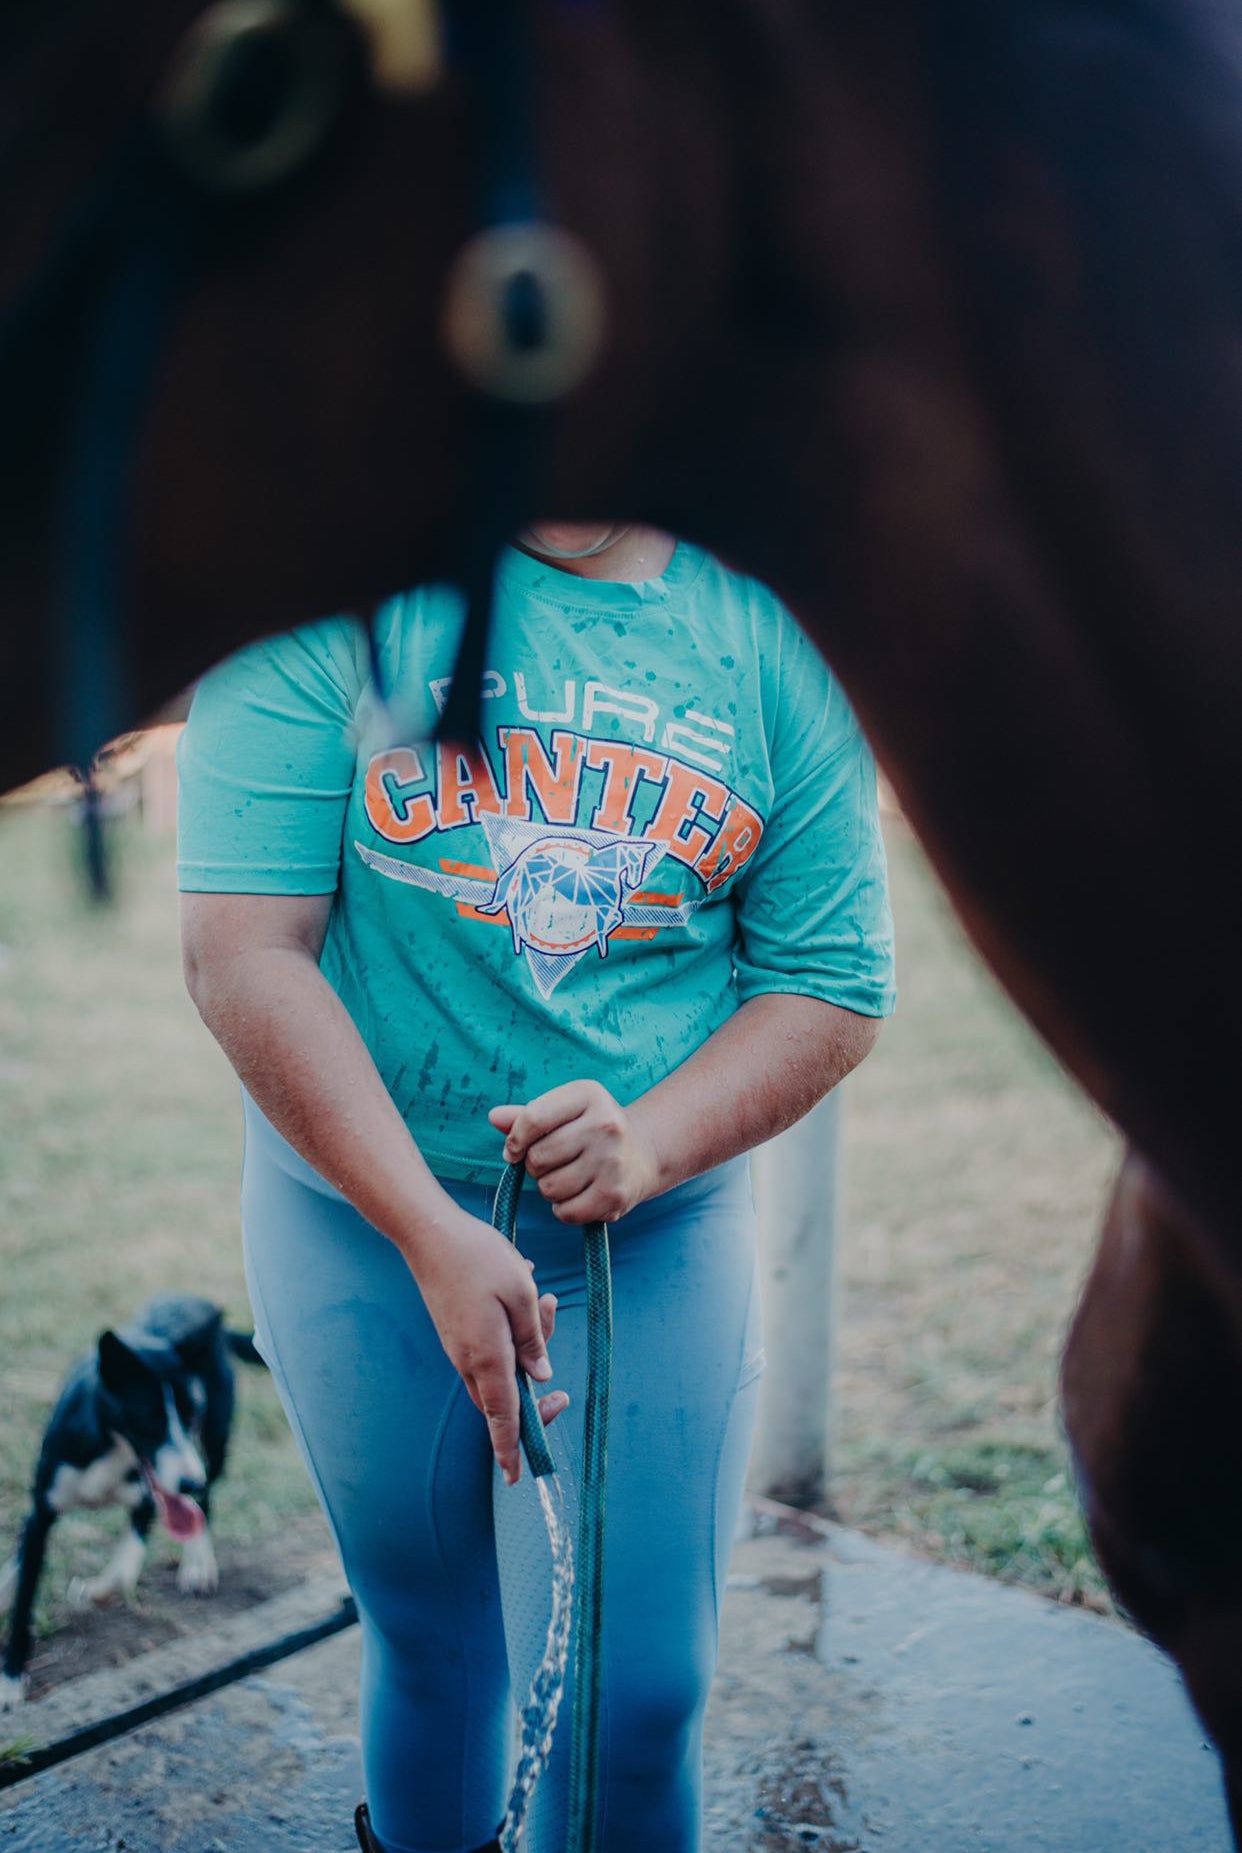 A person in a blue "Panthers" t-shirt and Pure Canter Pty Ltd Youth PURE Sports Crop is holding a hose, partially obscured by a horse in the foreground. A black and white dog with its tongue out is visible in the background. The scene appears to be outdoors.